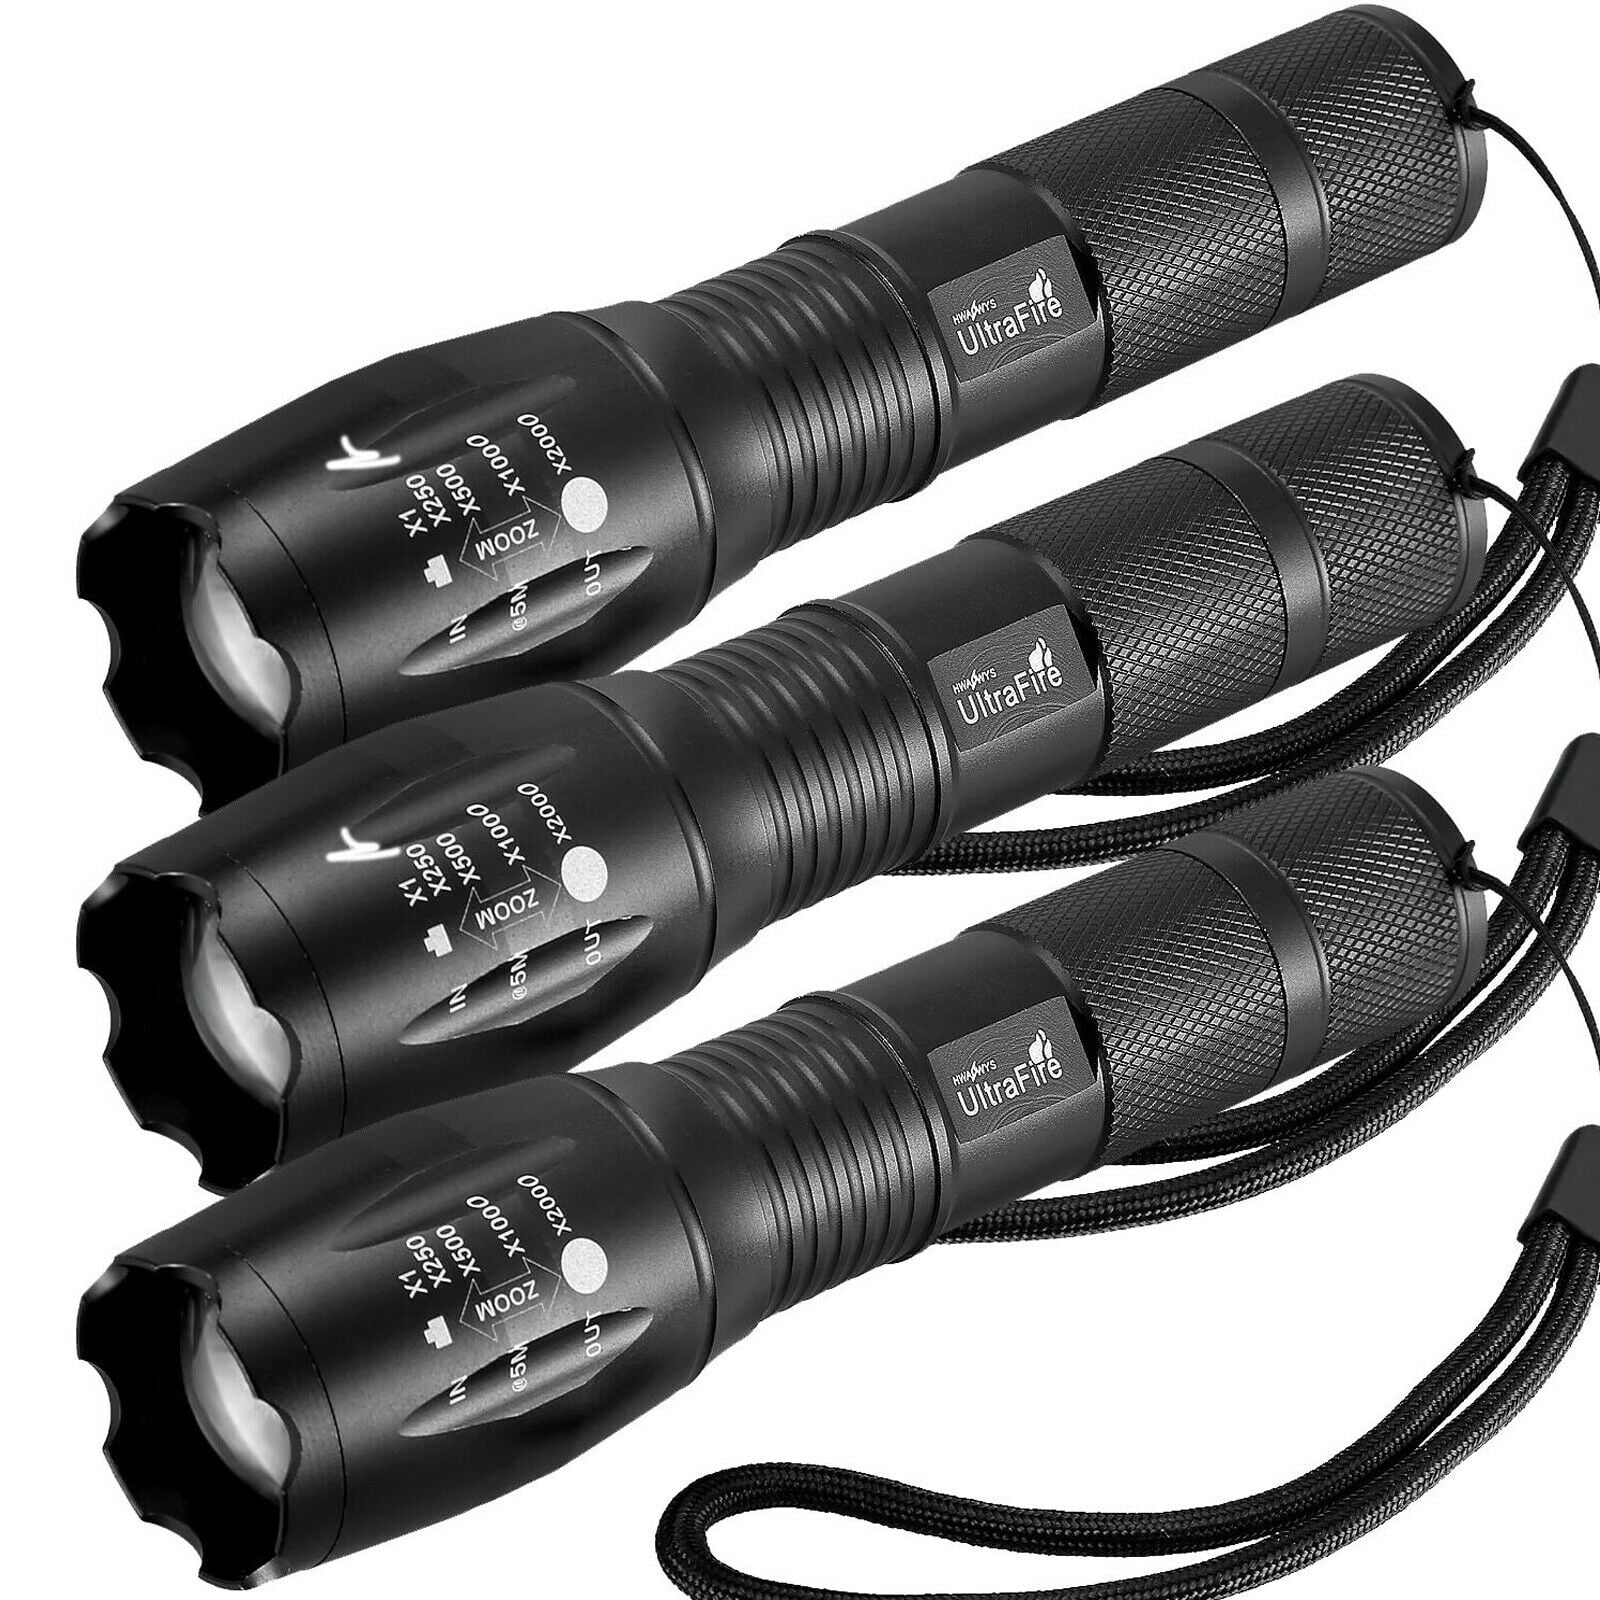 ULTRAFIRE TACTICAL TORCH LED MODEL G700 FLASHLIGHT BATTERY RECHARGEABLE 18650 